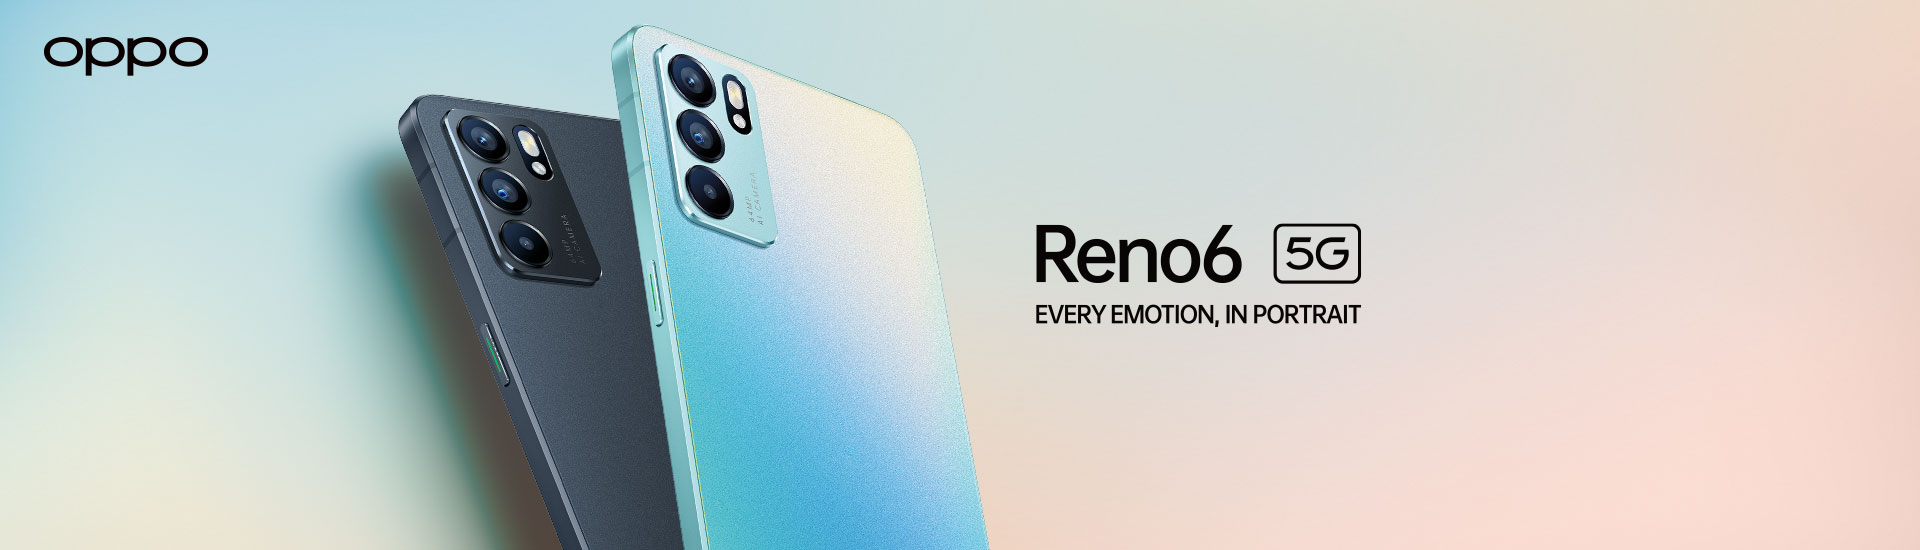 OPPO Reno6 5G add-on $155/mth up upon 5G SIM Subscription